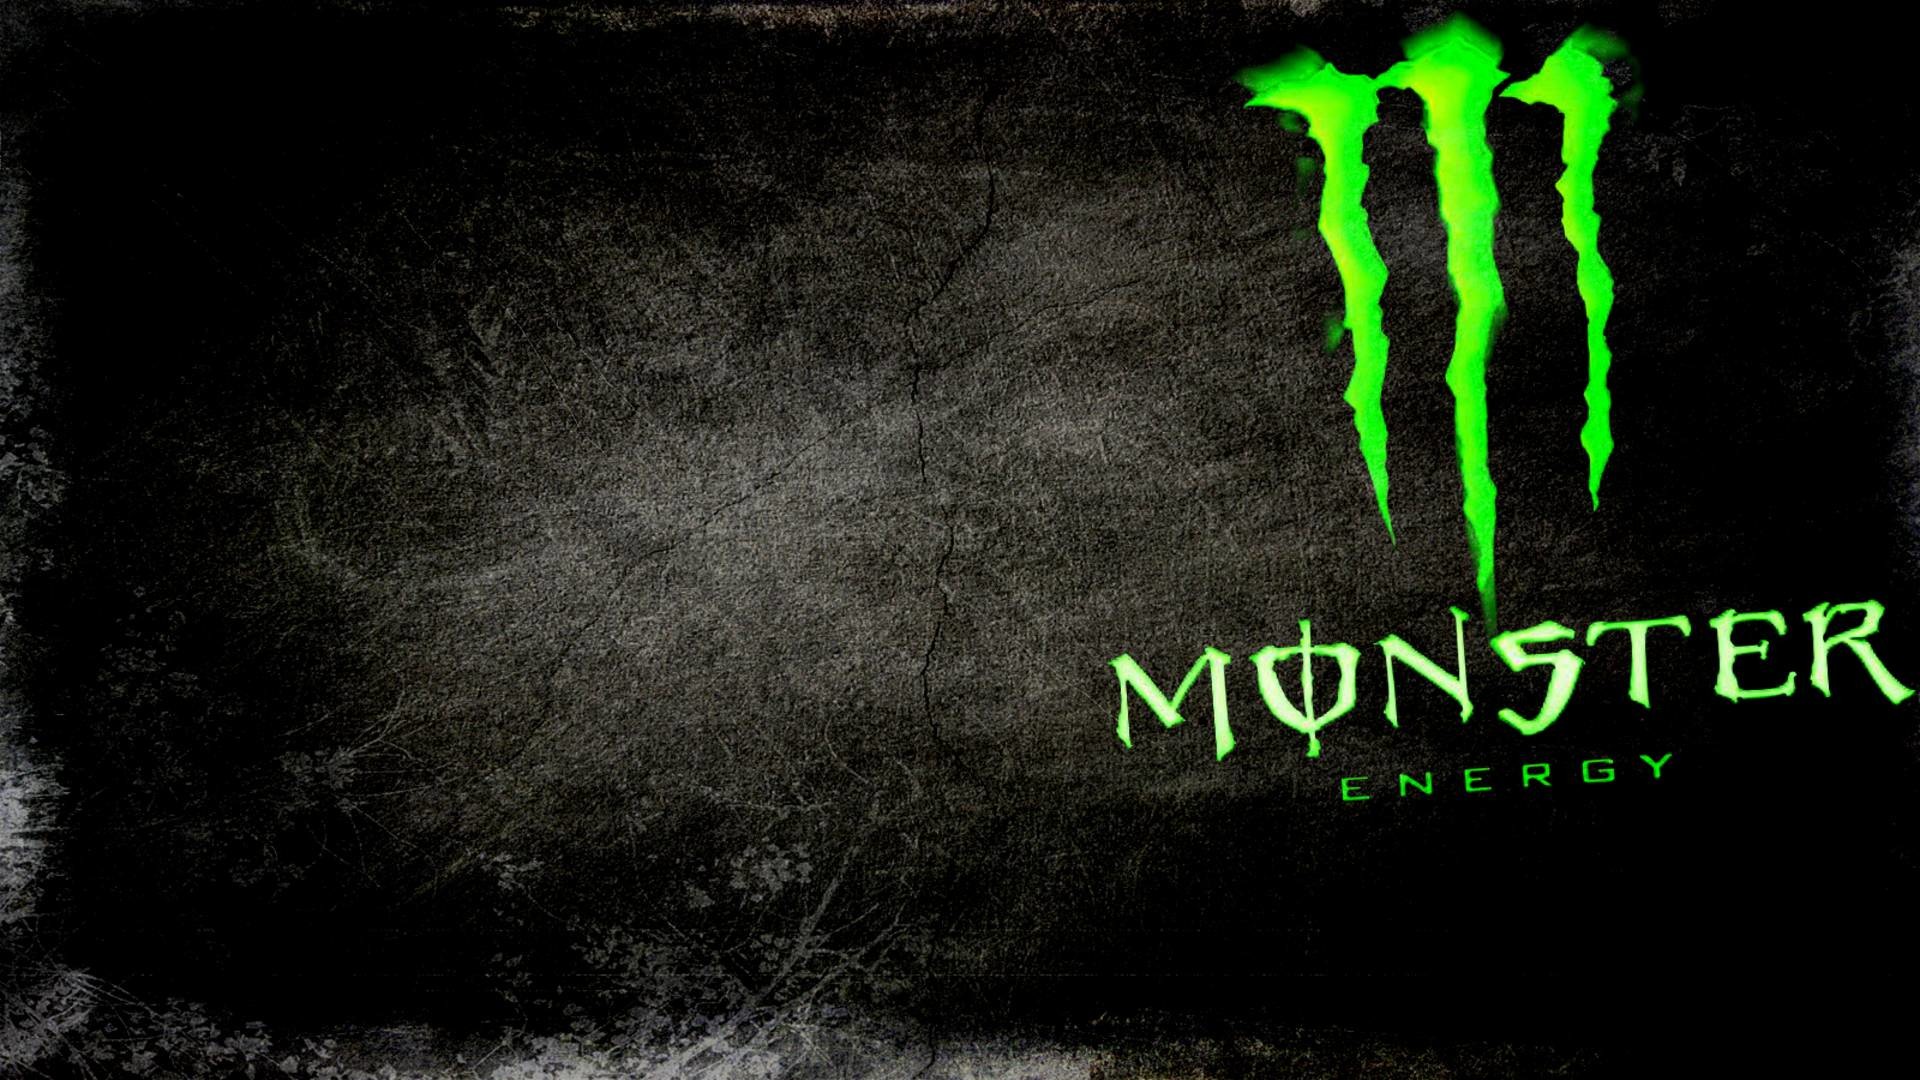 1920x1080 Monster Energy Wallpapers HD 2015 - Wallpaper Cave